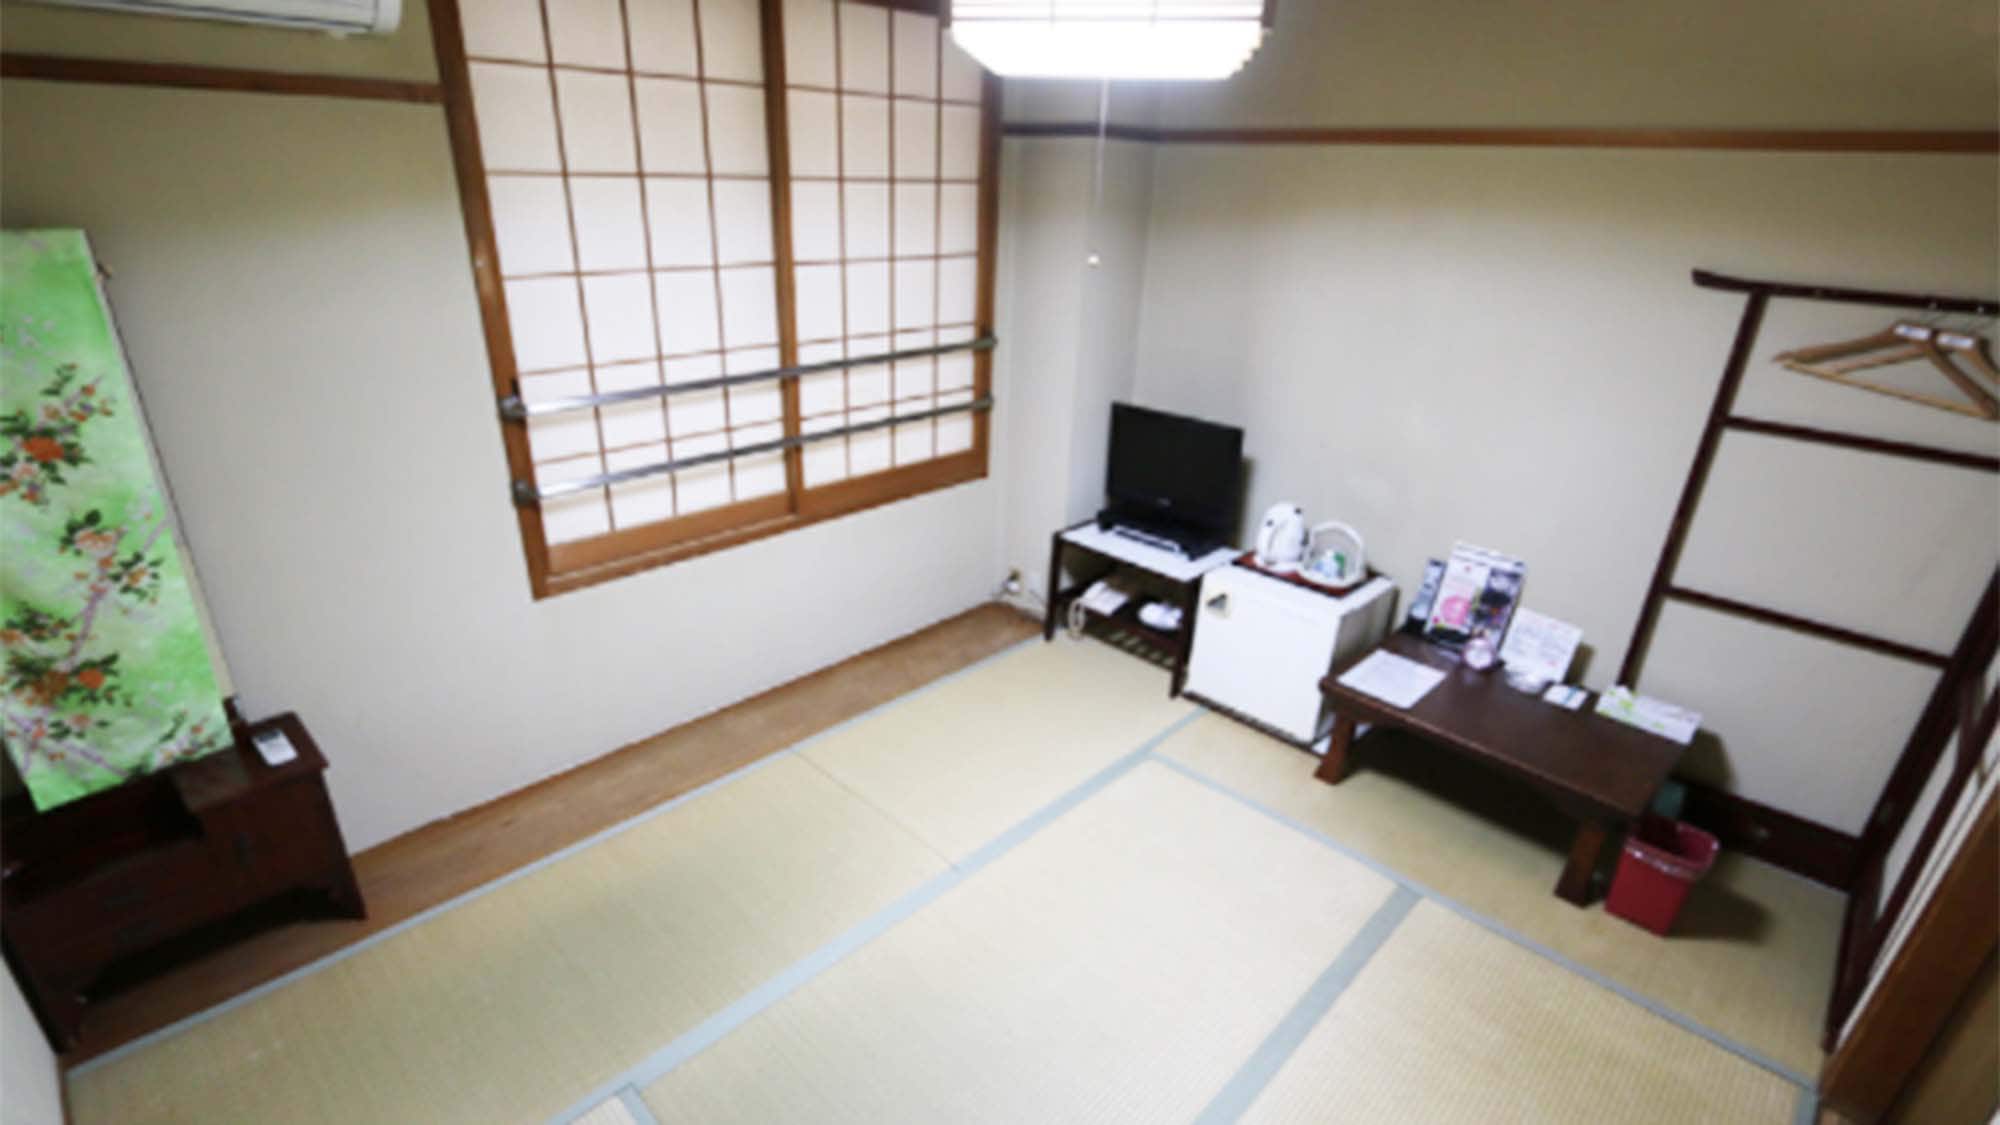 ・ Japanese-style room, please use according to your needs